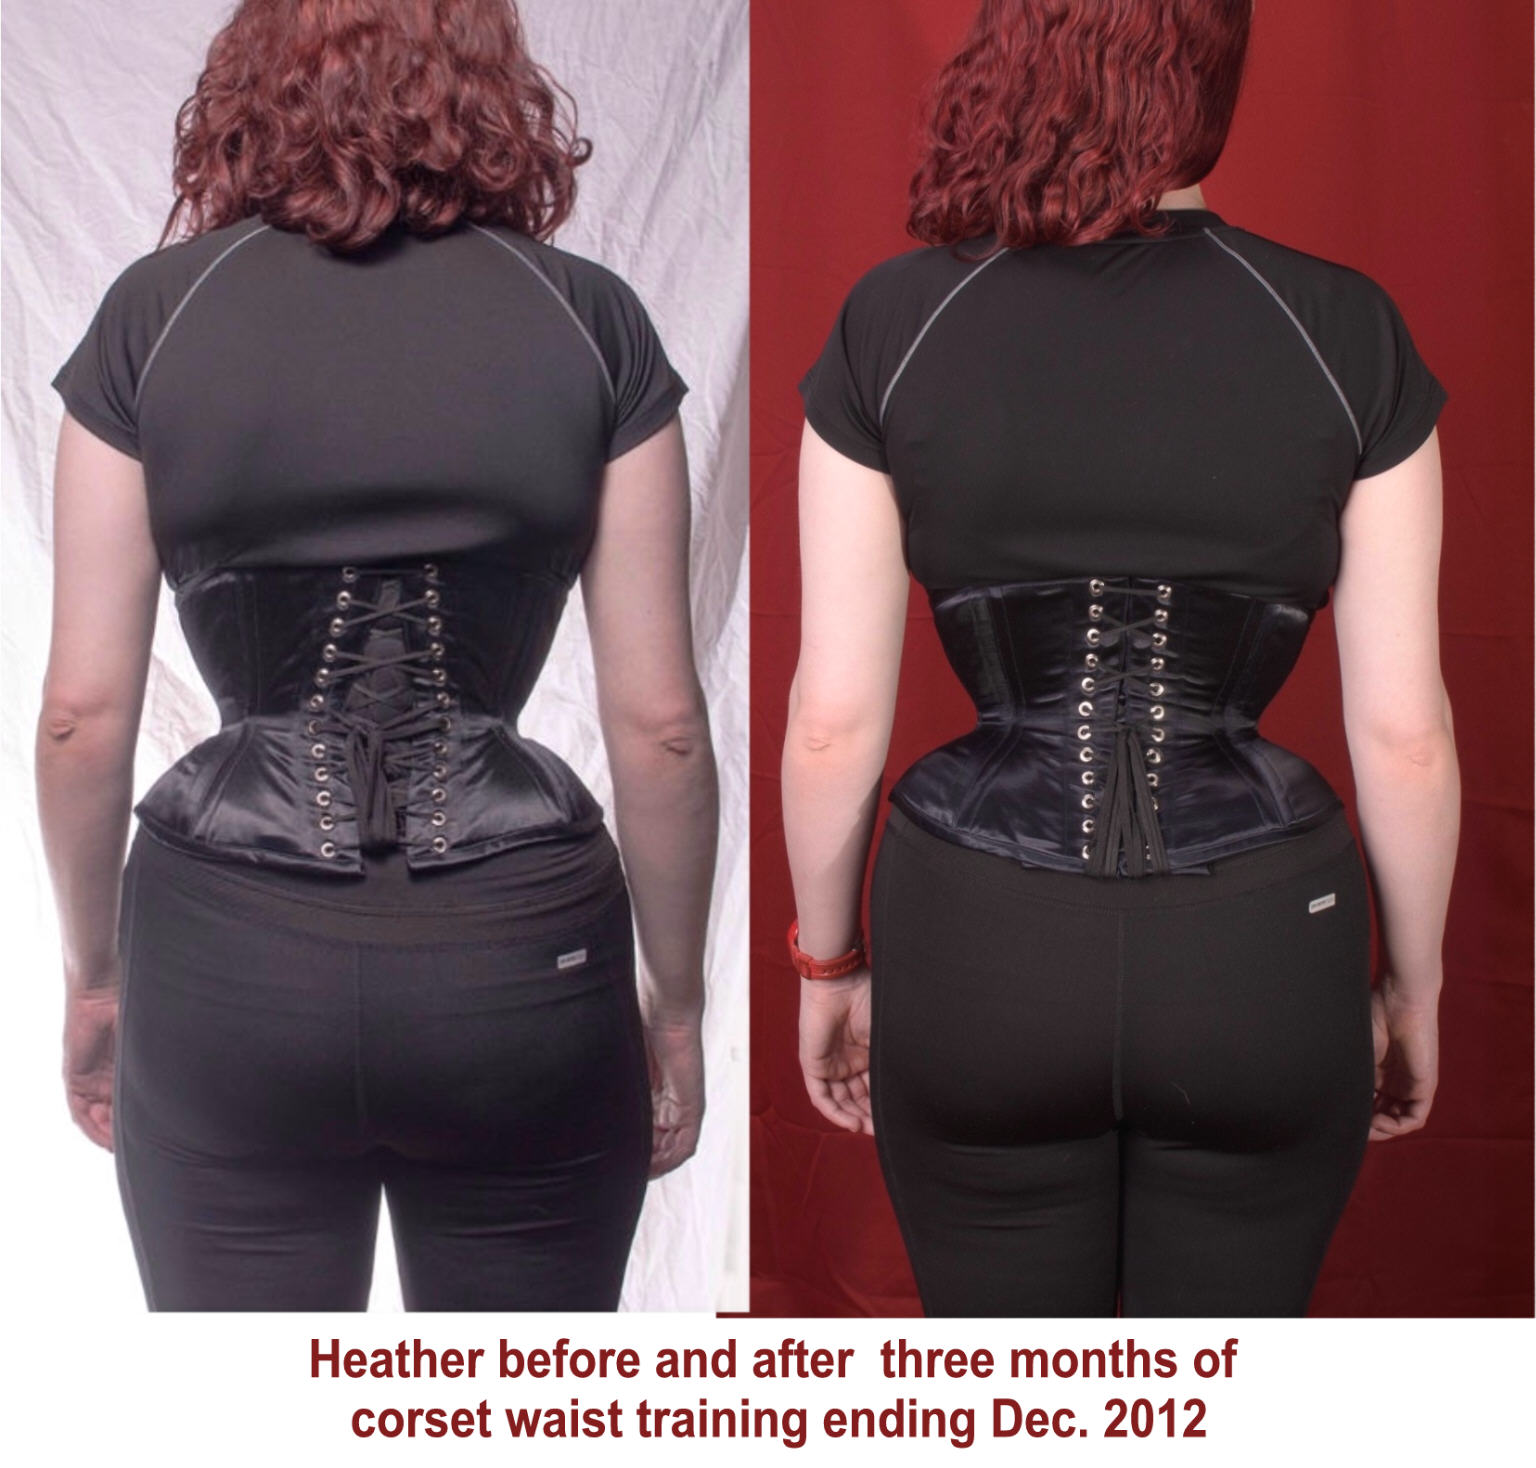 The Corset Diet” — and other troubling approaches to figure